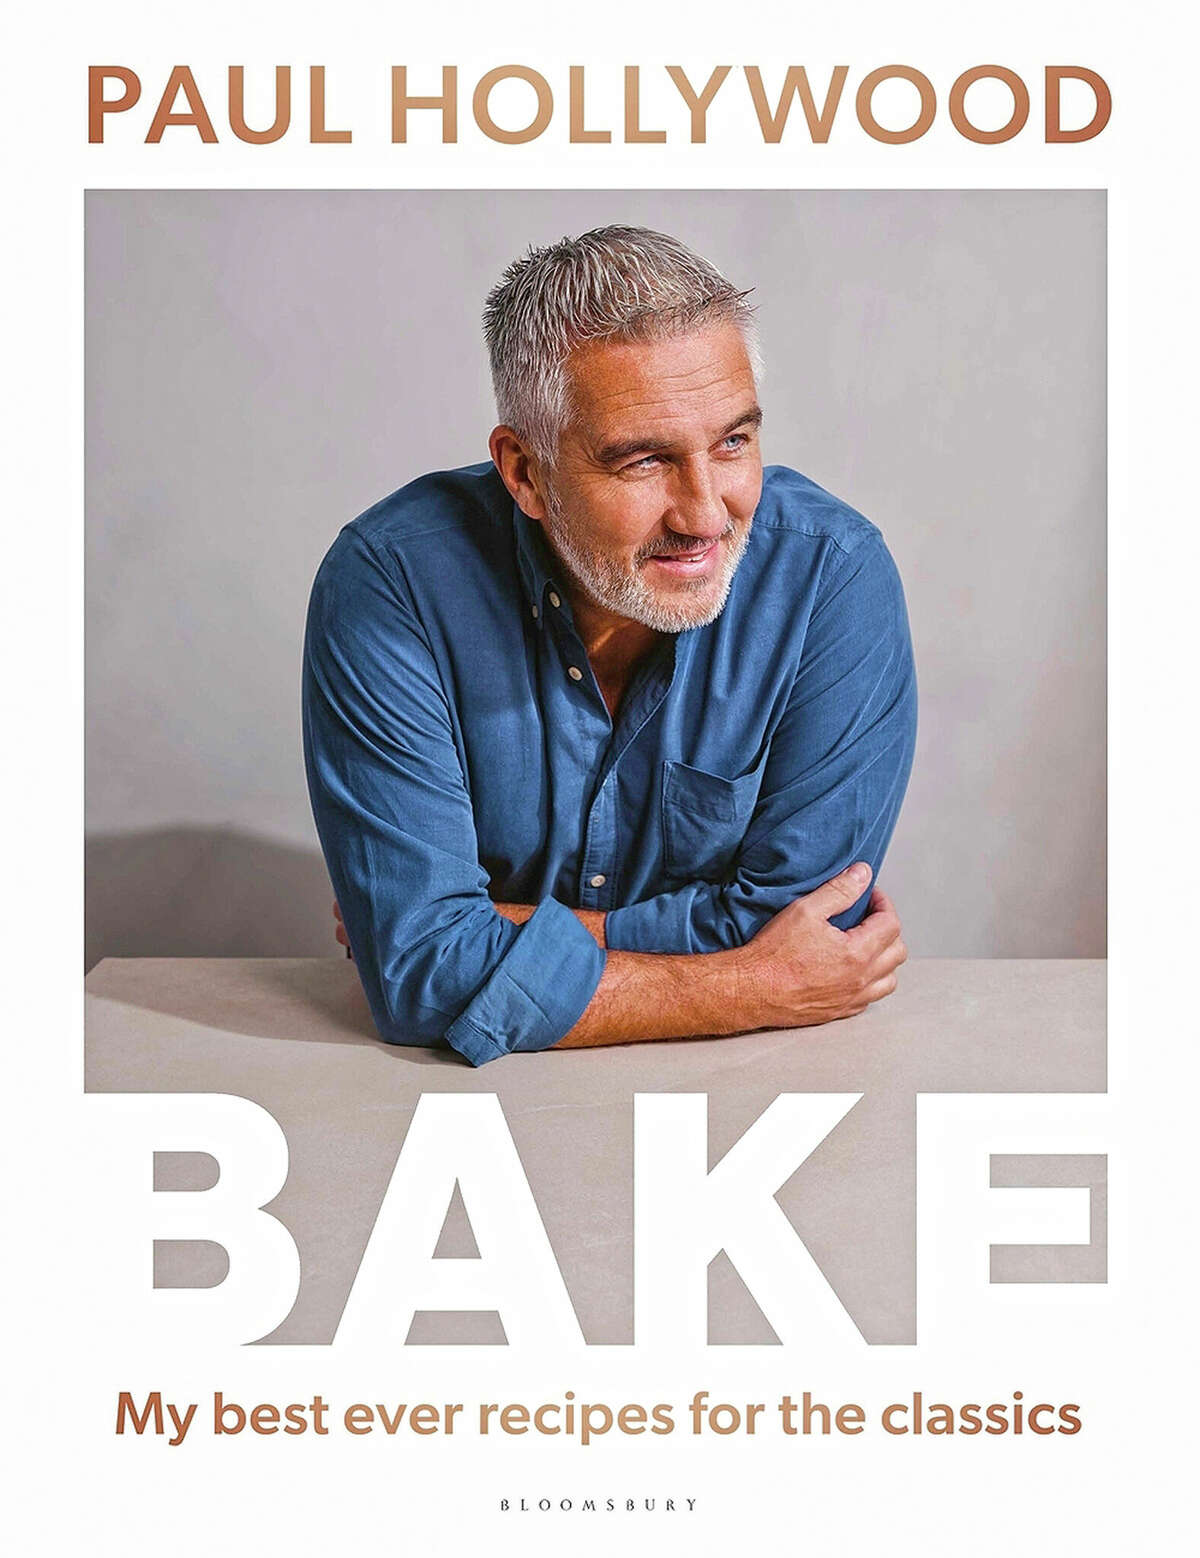 Star baker Paul Hollywood returns to the basics in his latest book, "Bake: My Best Ever Recipes for the Classics."